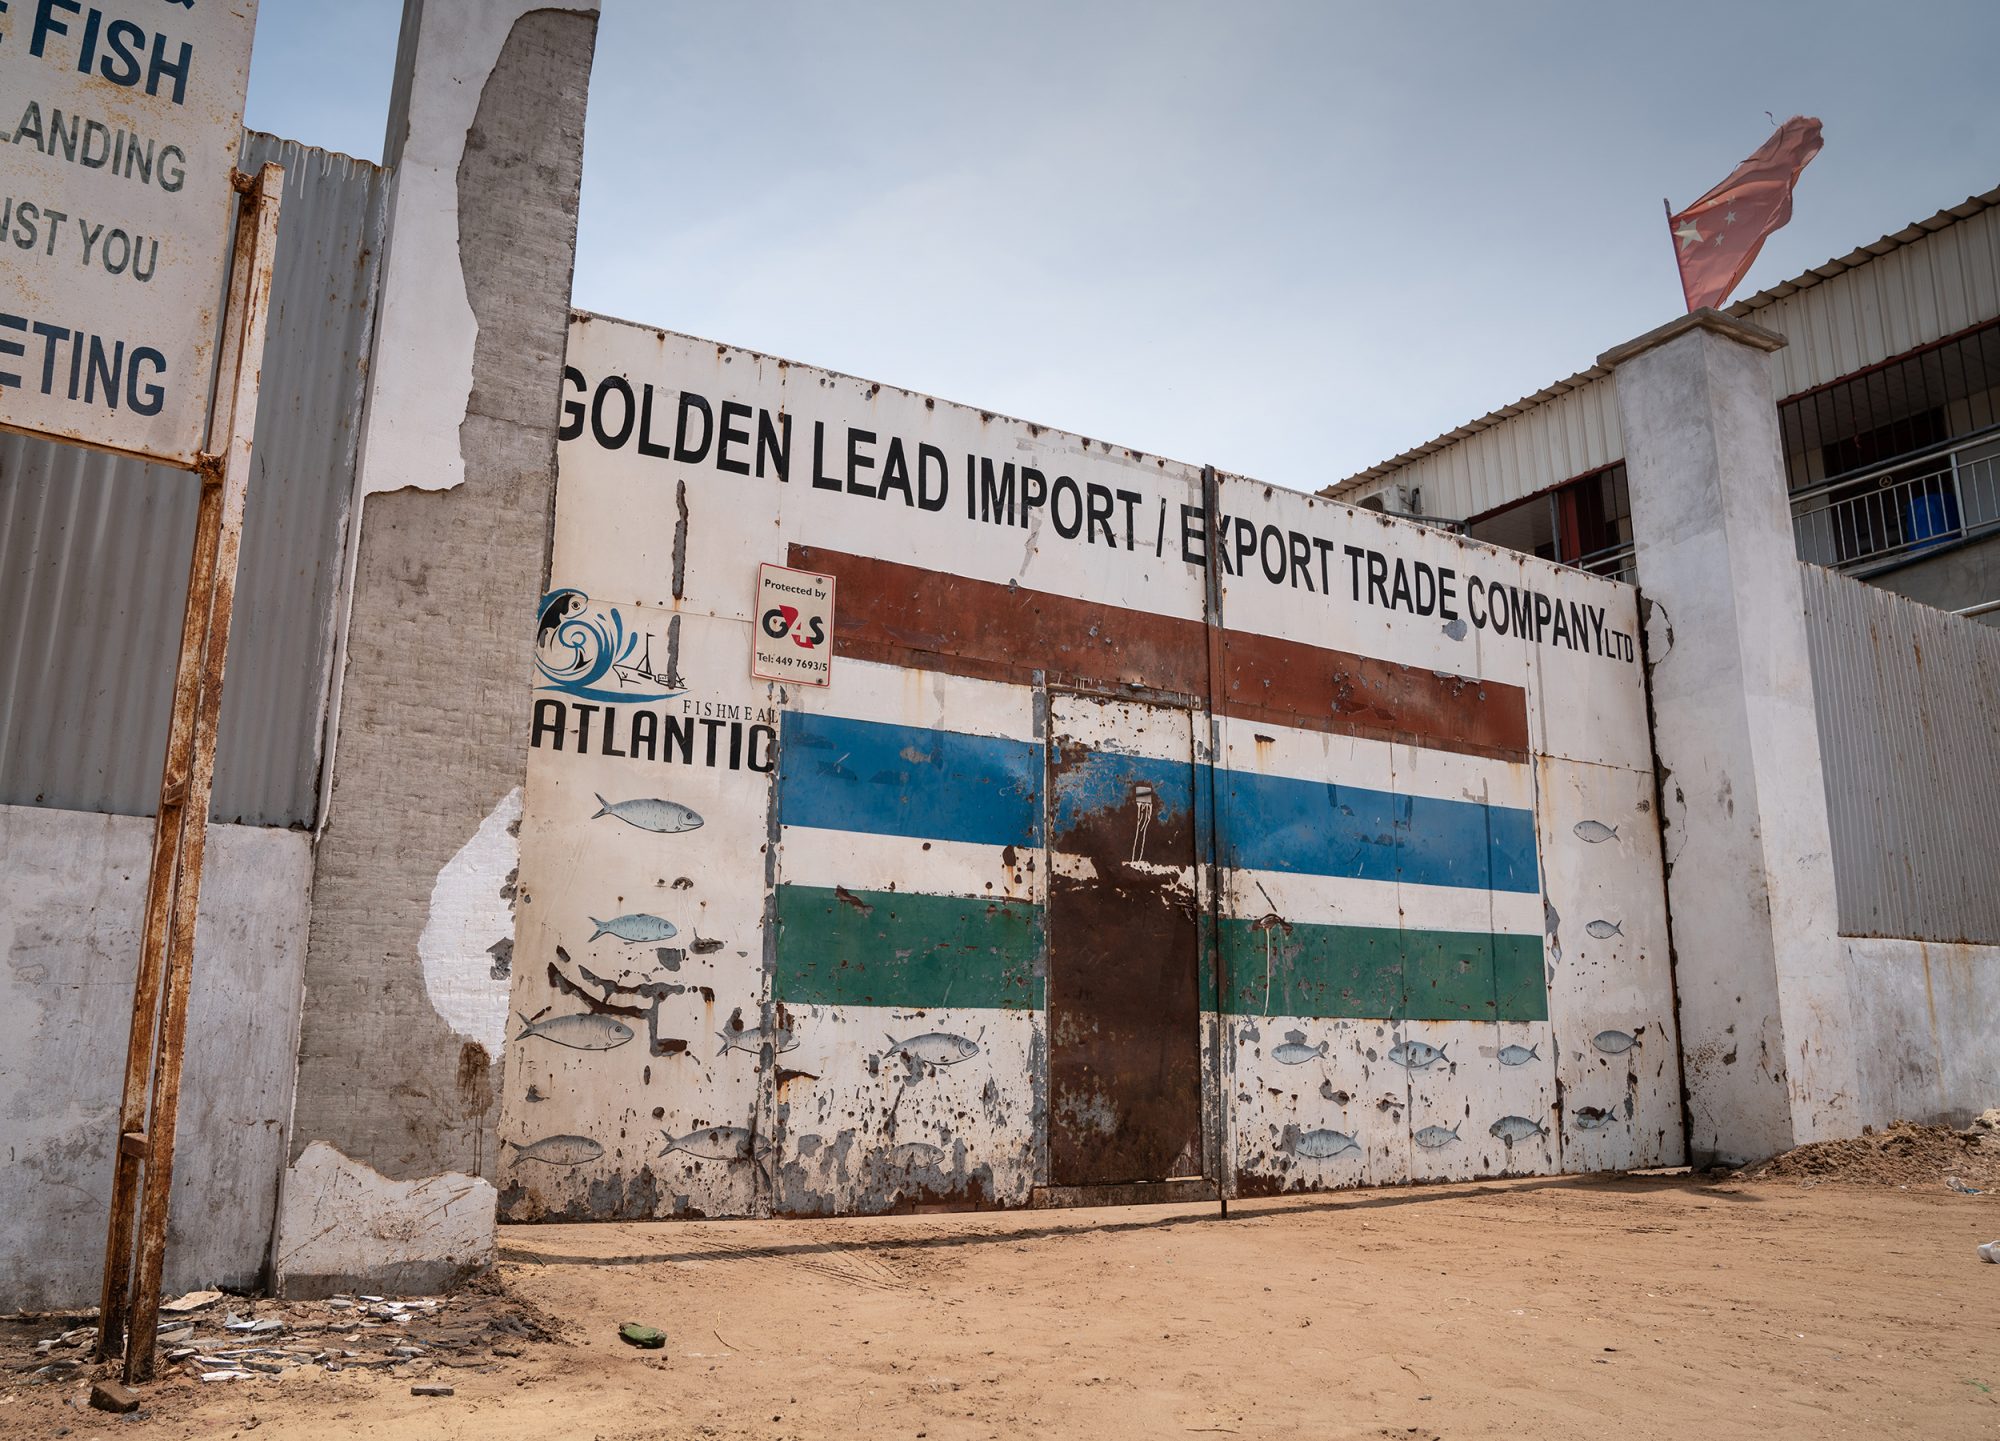 The Golden Lead in Gunjur is one of three Chinese-owned fishmeal factories operating along the Gambia’s short coastline (Image: The Changing Markets Foundation)